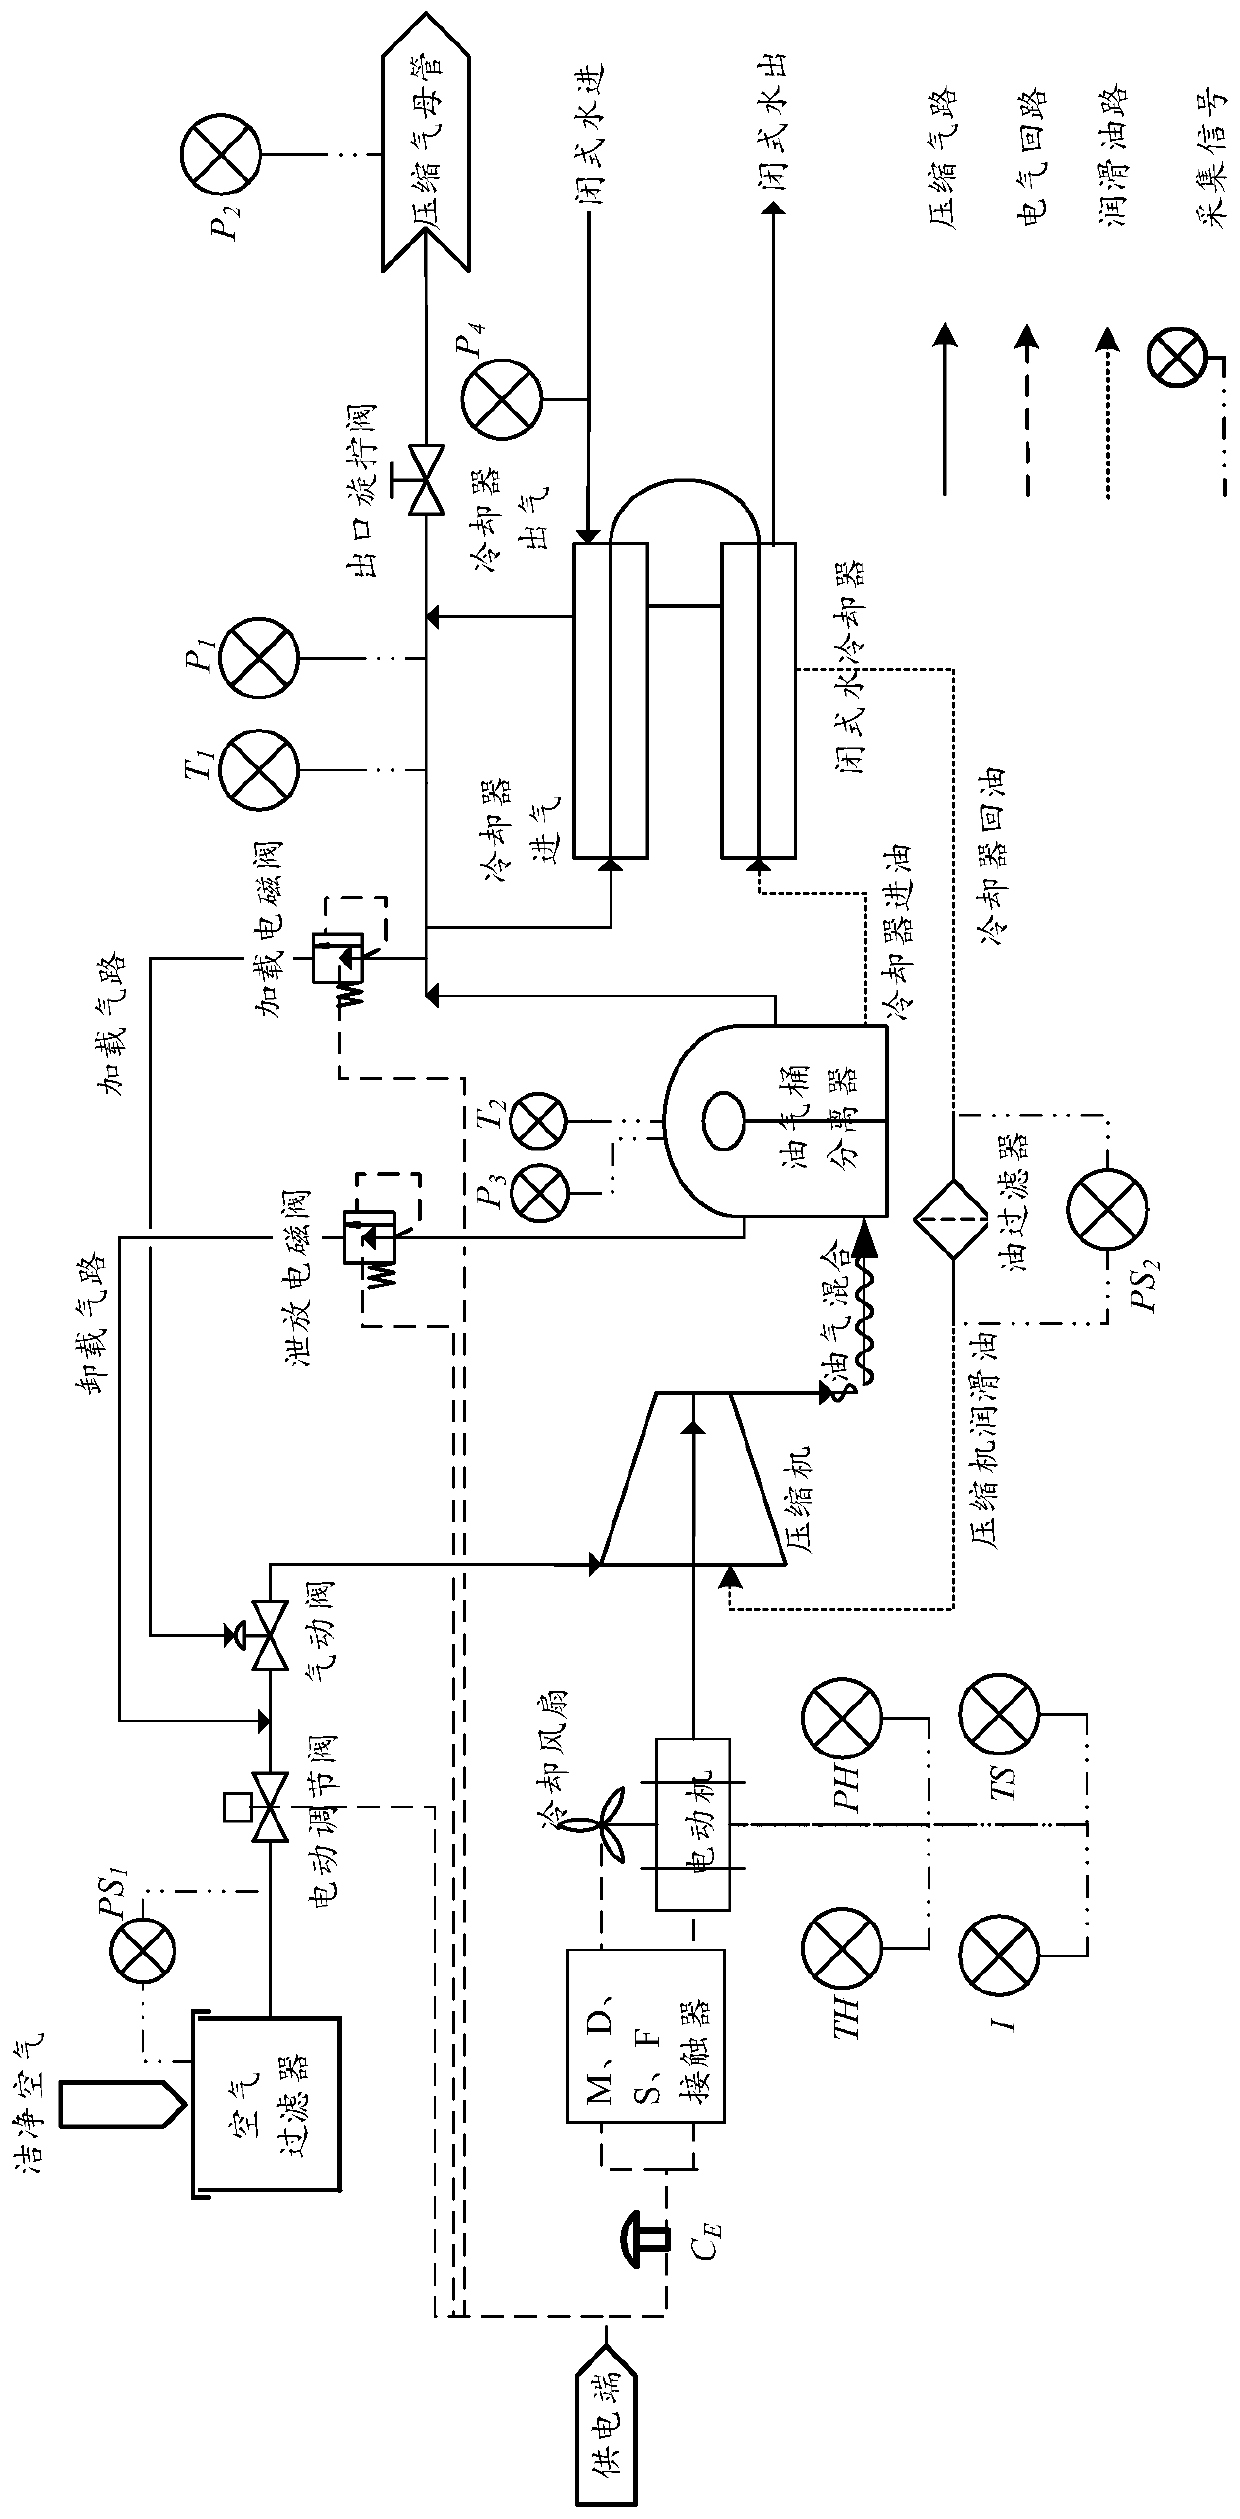 Energy-saving type air compressor control system and method based on DCS comprehensive control